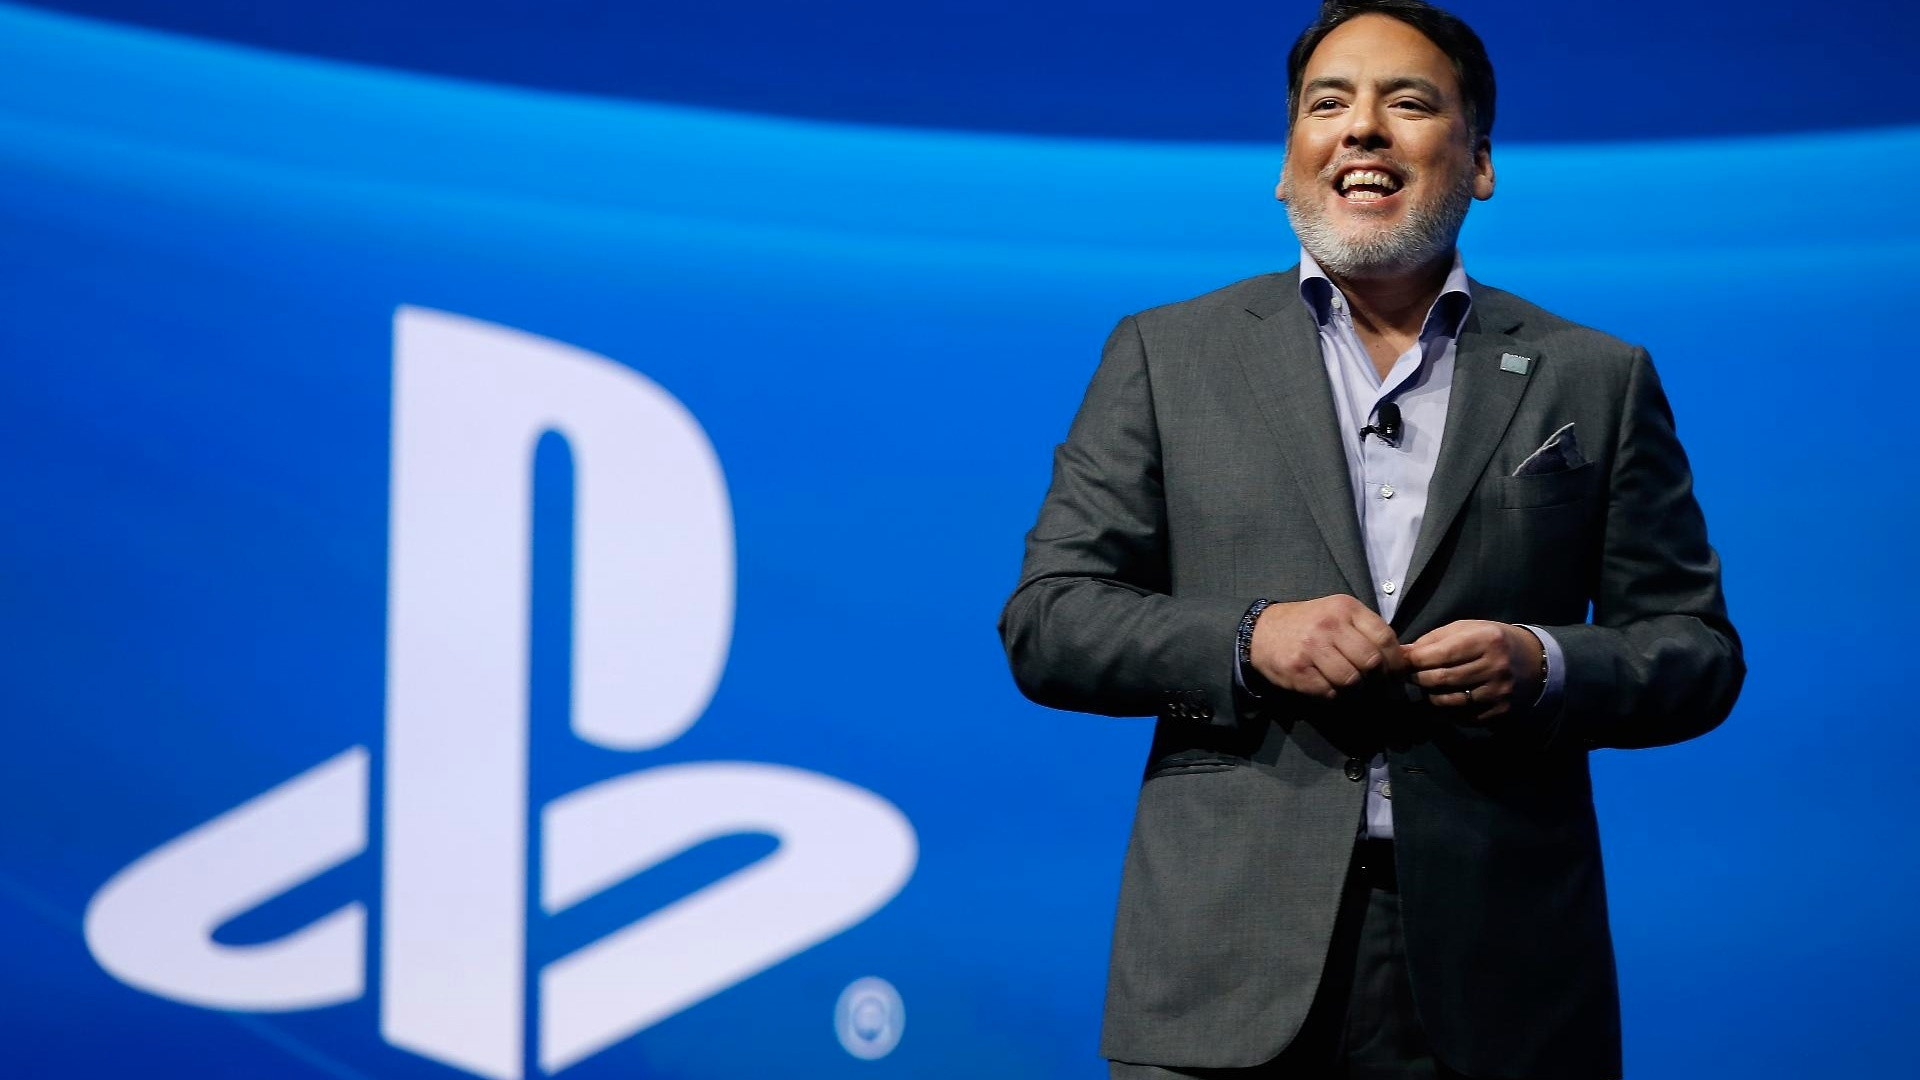 Shawn Layden departs Sony amid restructuring confusion and potential struggle - GameDaily.biz | We Make Games Our Business GameDaily.biz | We Make Games Our Business